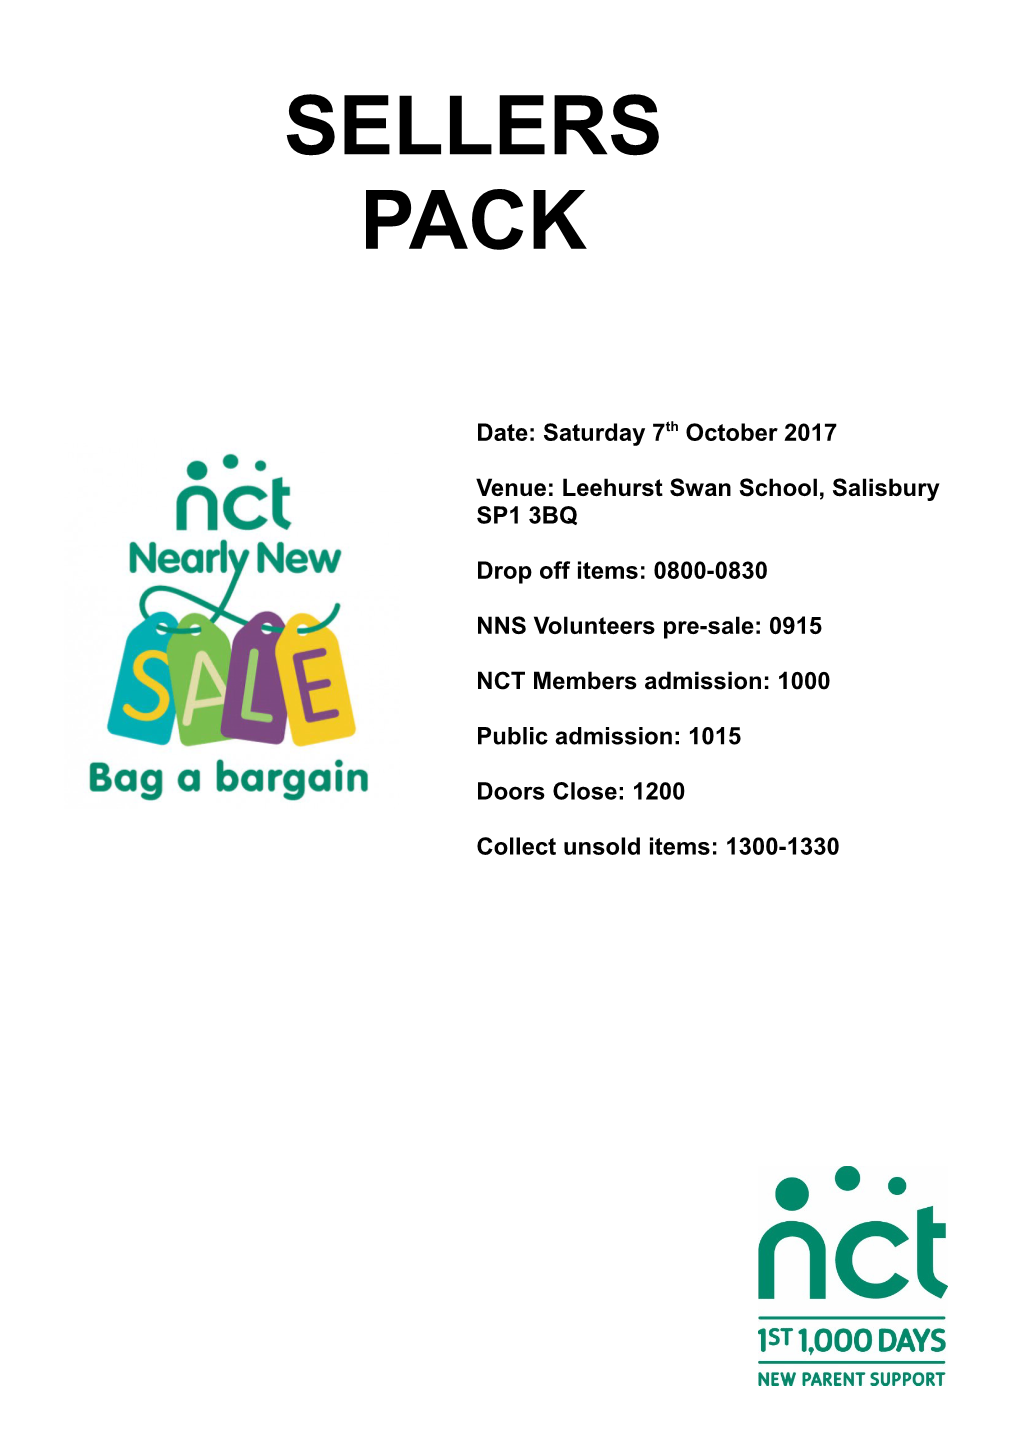 Thank You for Signing up to Sell at Our Next NCT Nearly New Sale. Our Sale Is a Great